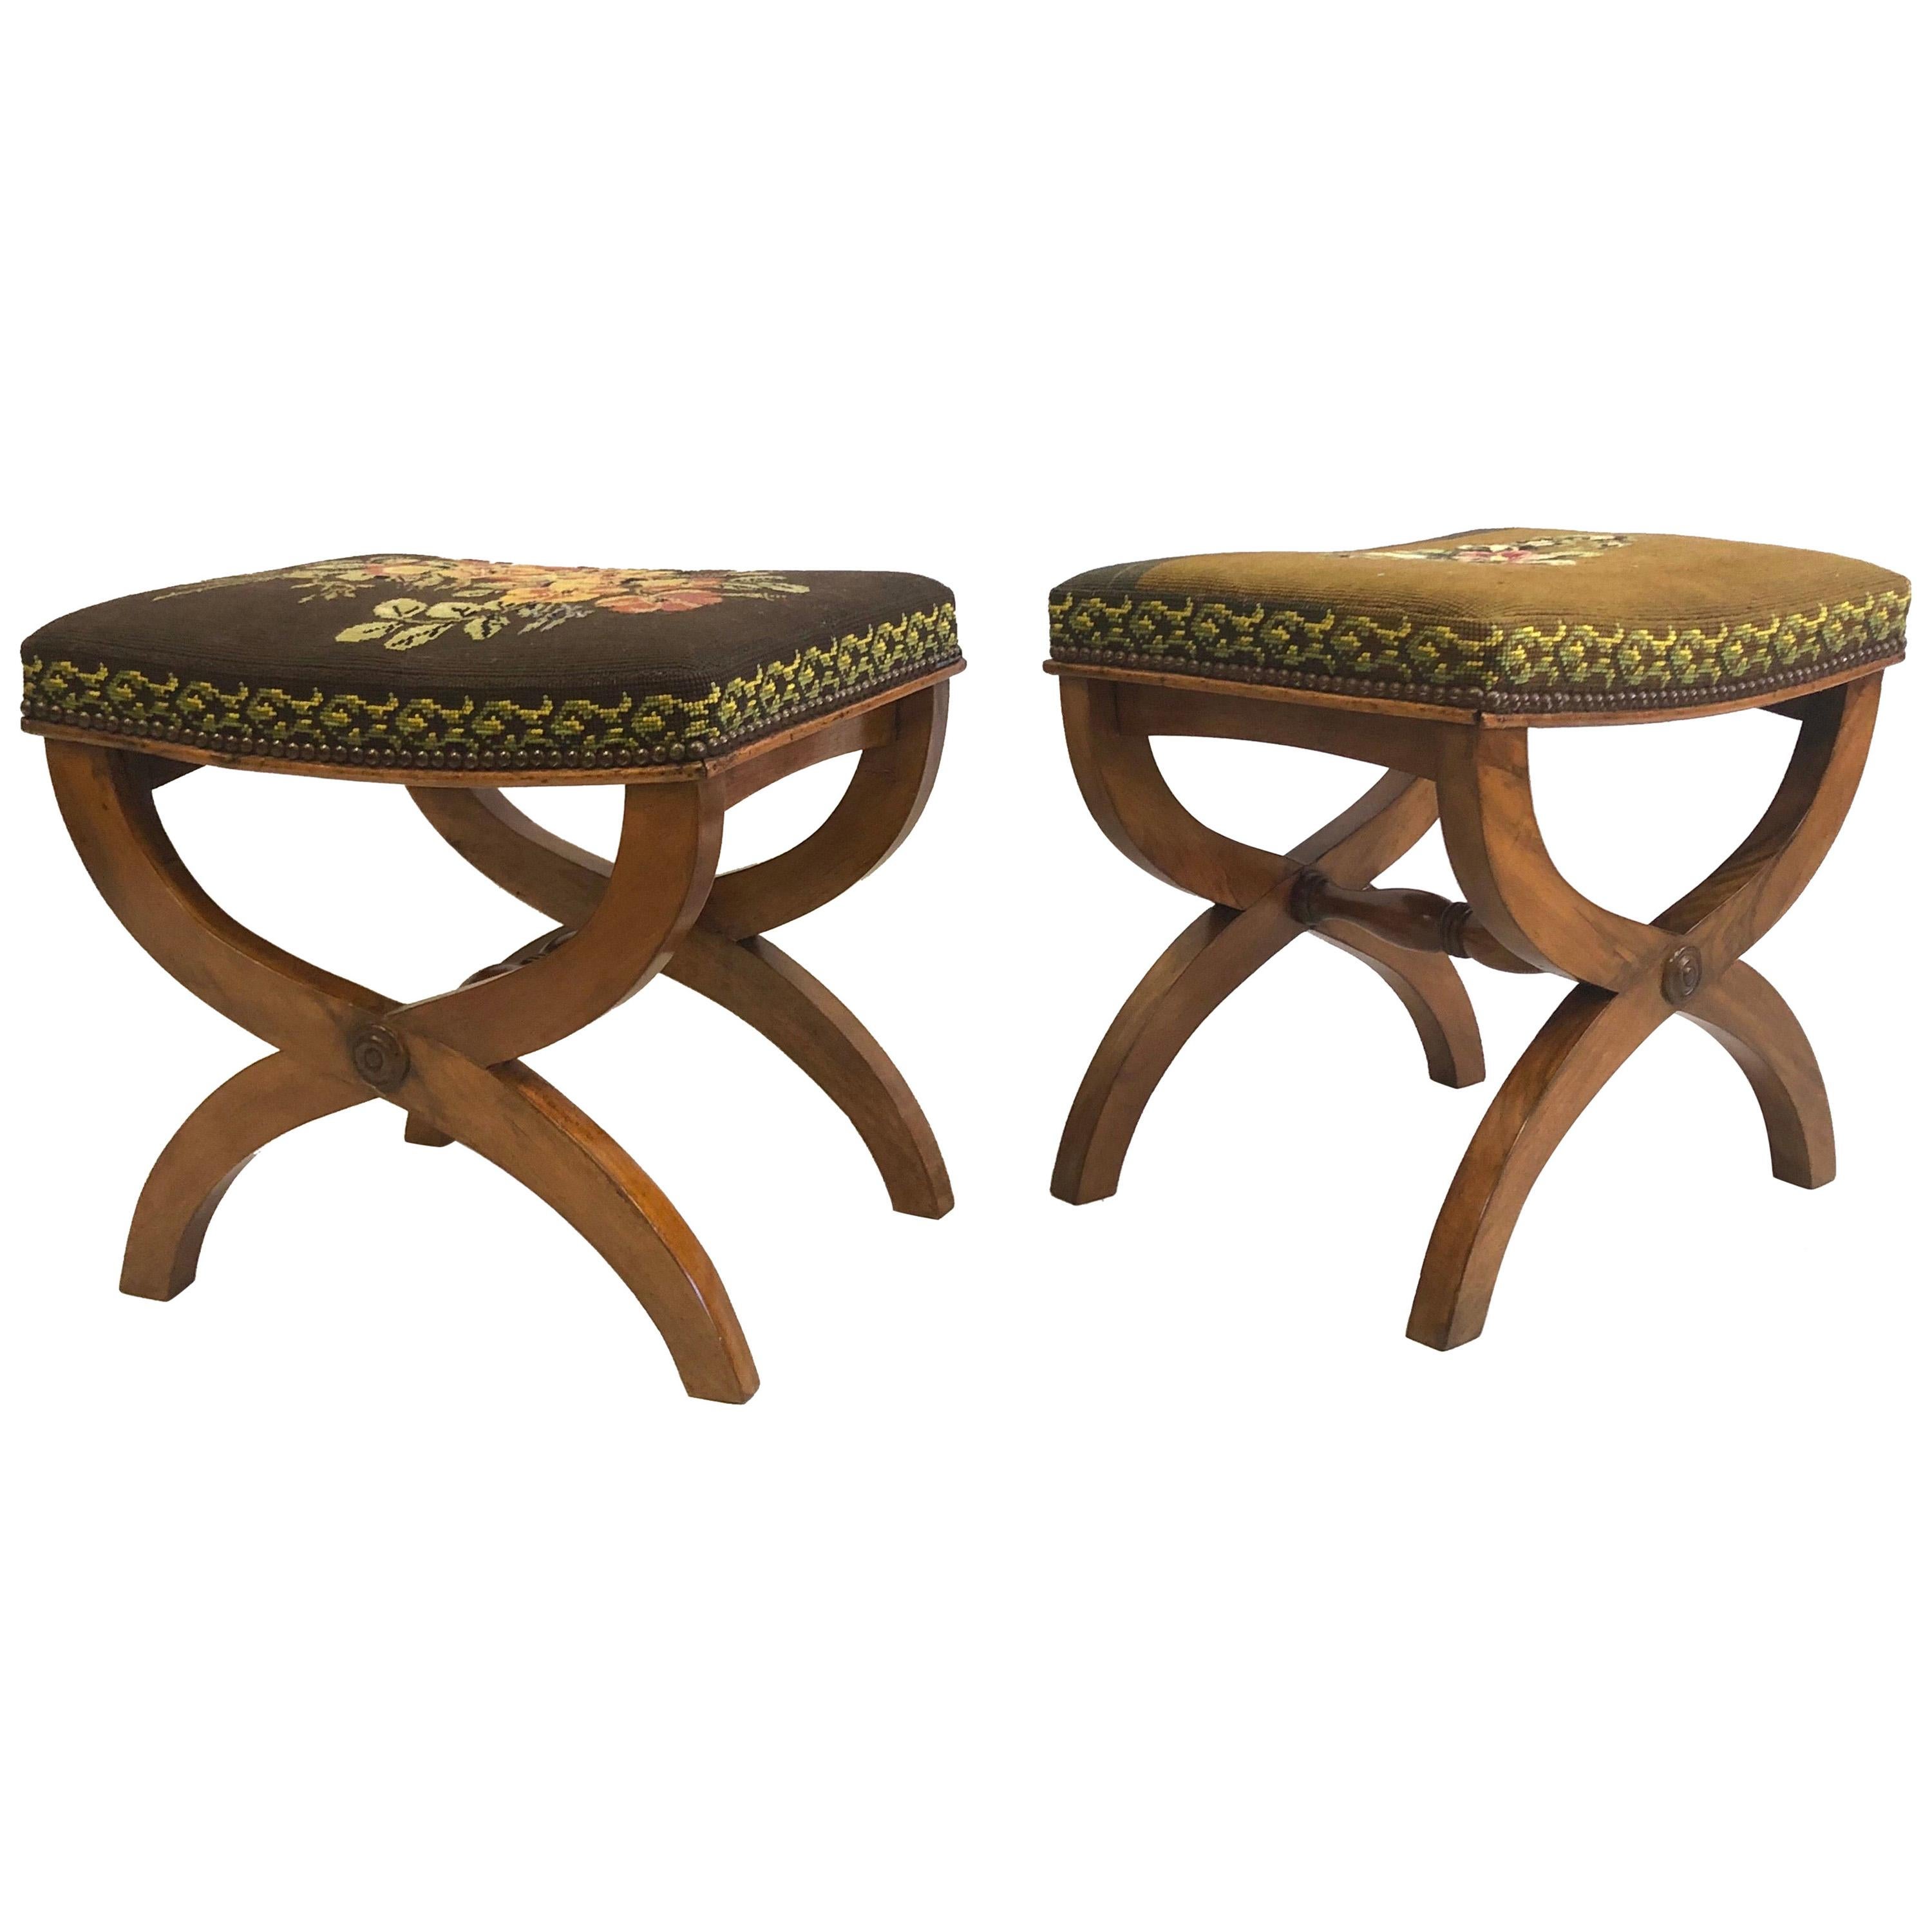 Pair of French Modern Neoclassical Stools / Benches Attributed to Andre Arbus